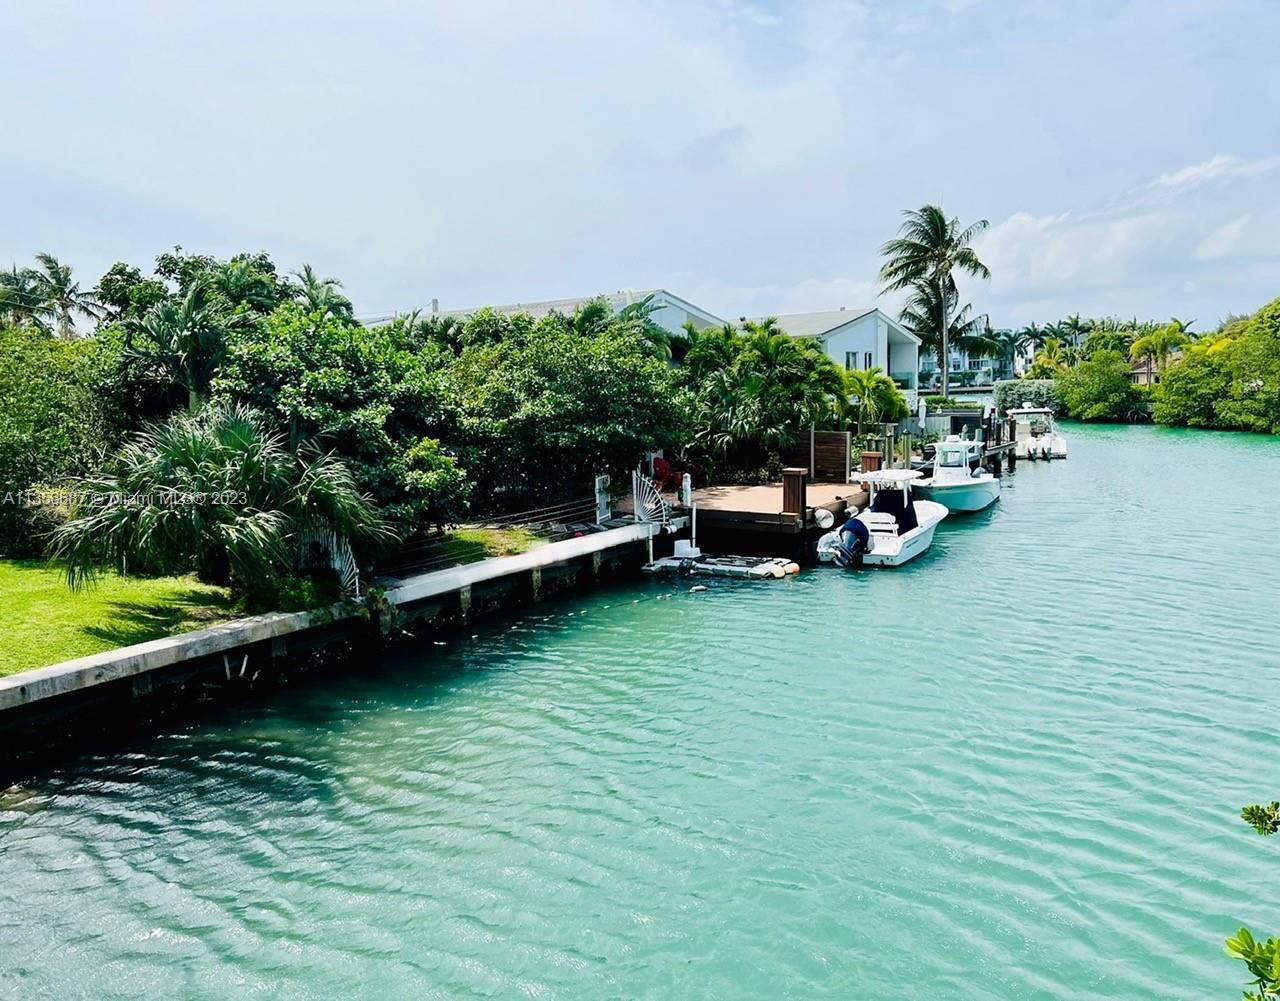 Boater's Paradise and Developers dream! 2 waterfront properties on Miami Beach for the price of one!